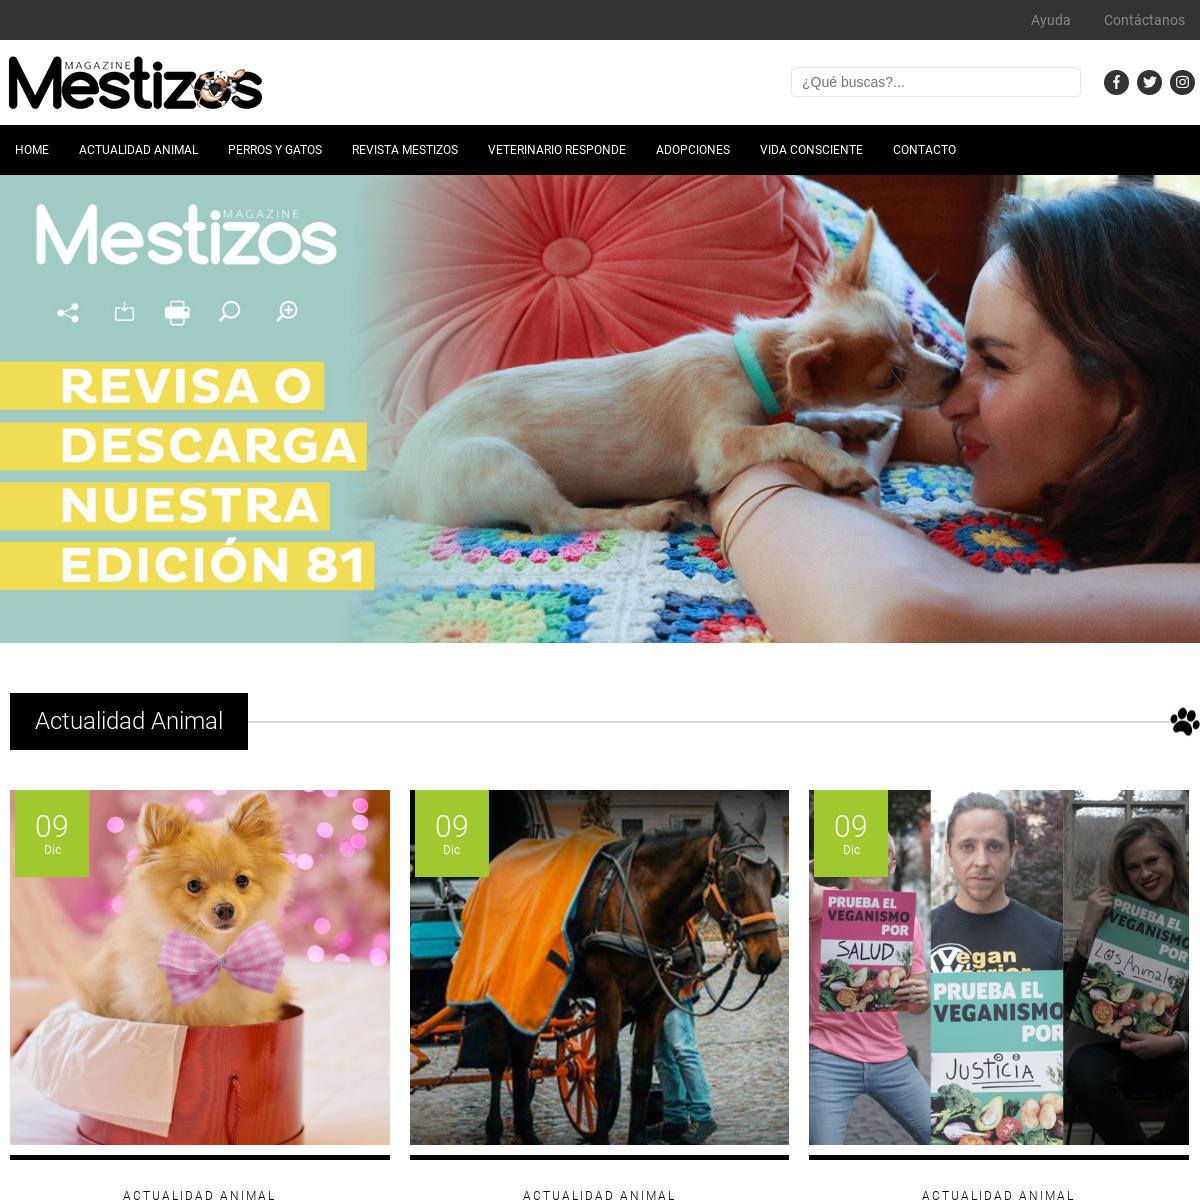 A complete backup of mestizos.cl